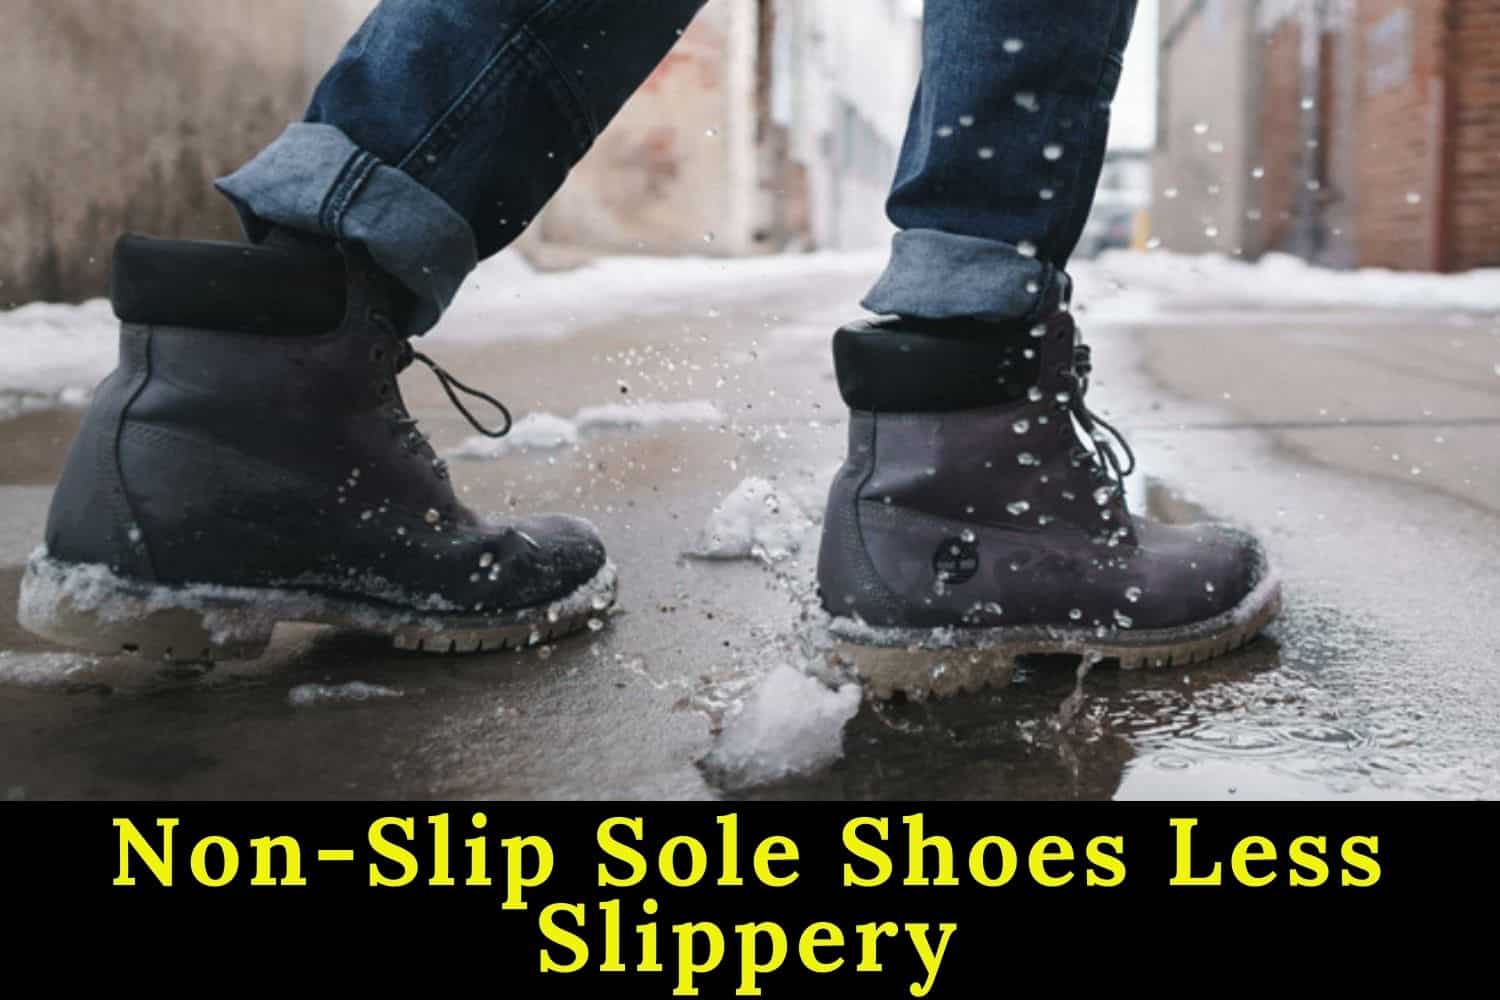 Non-Slip Sole Shoes Less Slippery